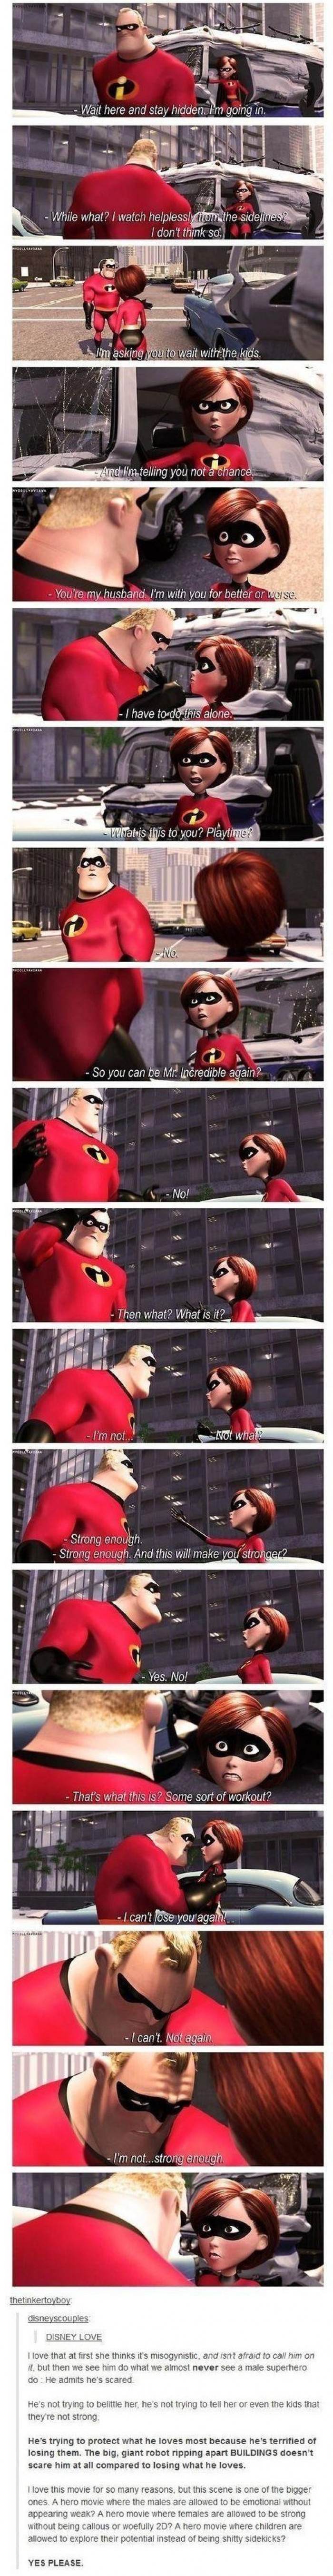 Bring on The Incredibles 2!!!